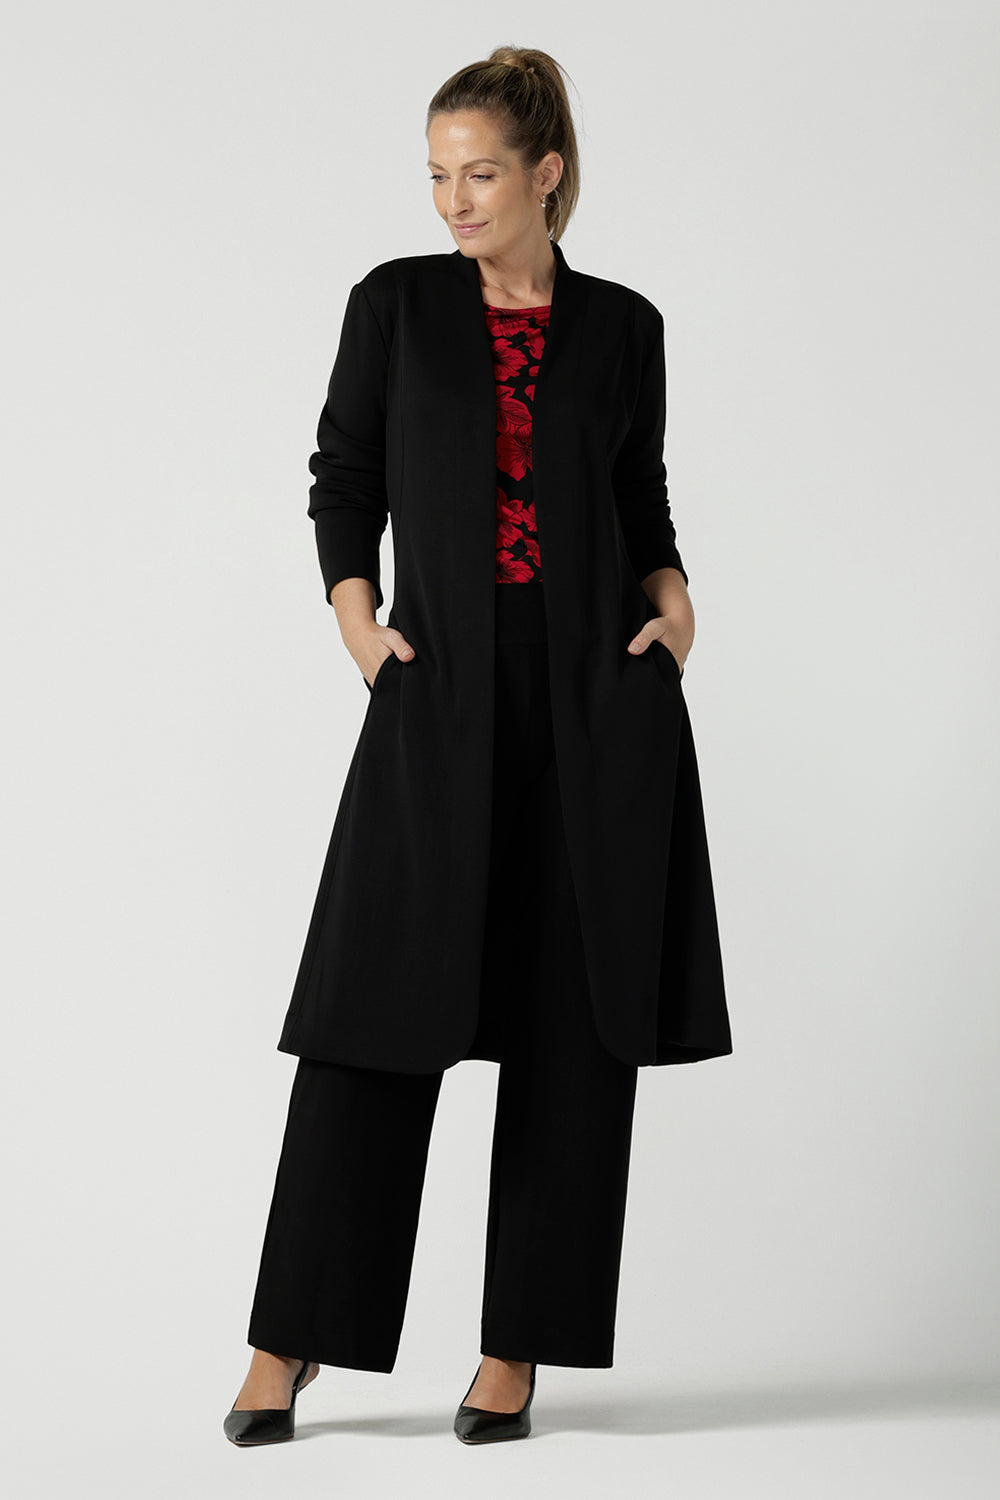 Size 10 woman wears the Mason top in Bold Poppy . A long sleeve jersey top for women with red floral on a black base. Comfortable work top for women size 8 - 24. Soft jersey fabric and made in Australia for women. Styled back with the Monroe pant in black a straight leg pant. Styled back with the Sorel Trench in black modal. 